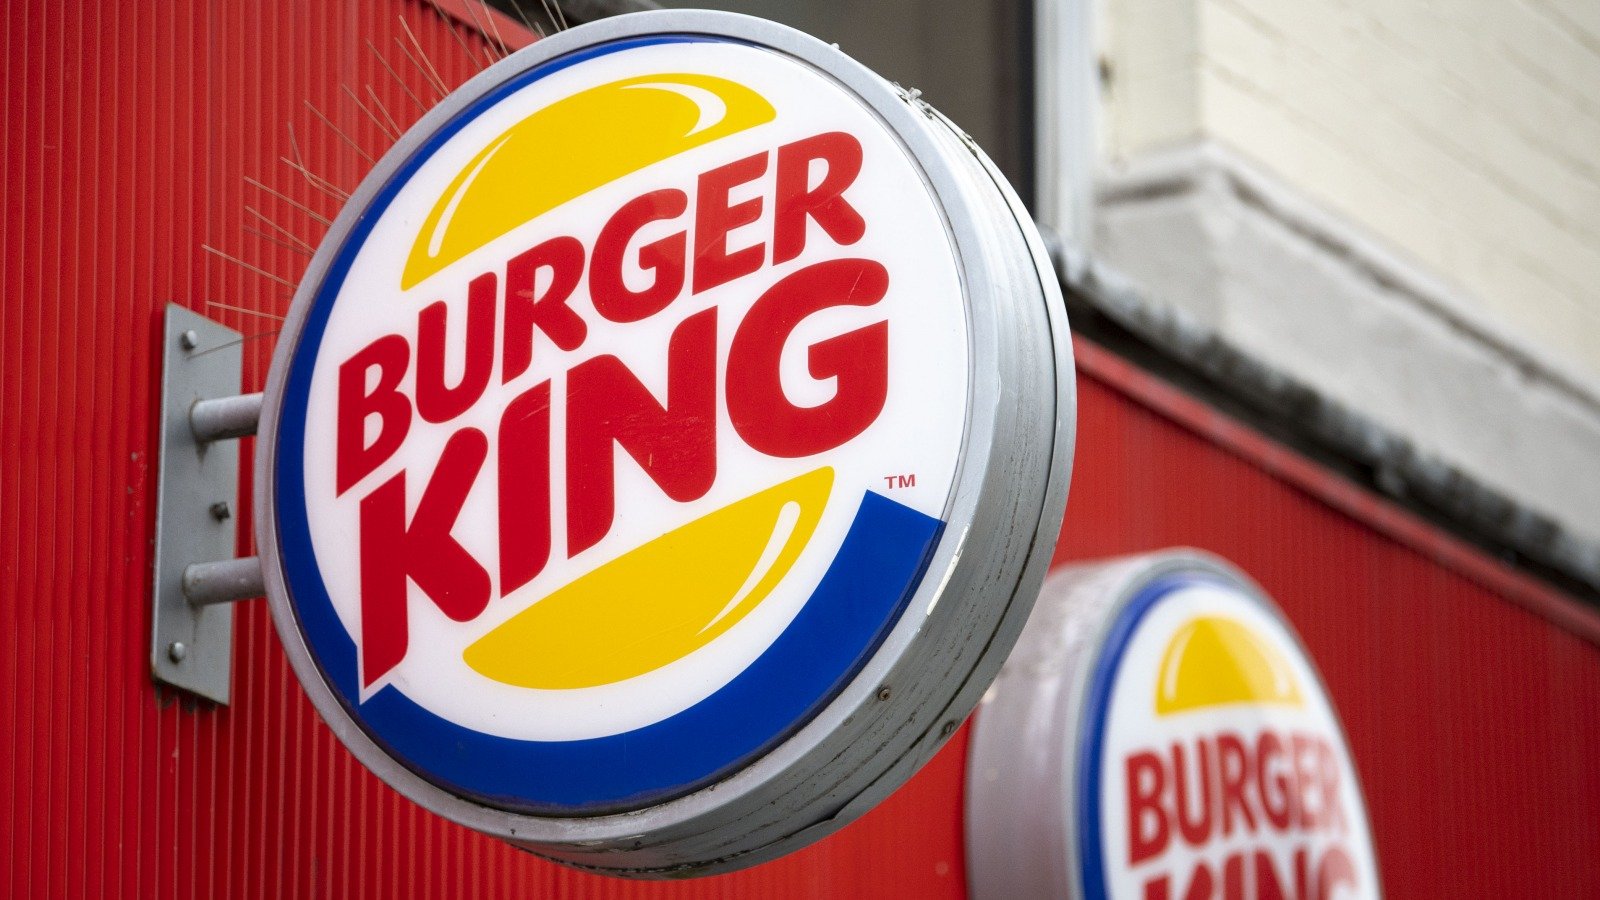 You Should Never Order Chicken Nuggets From Burger King. Here's Why.